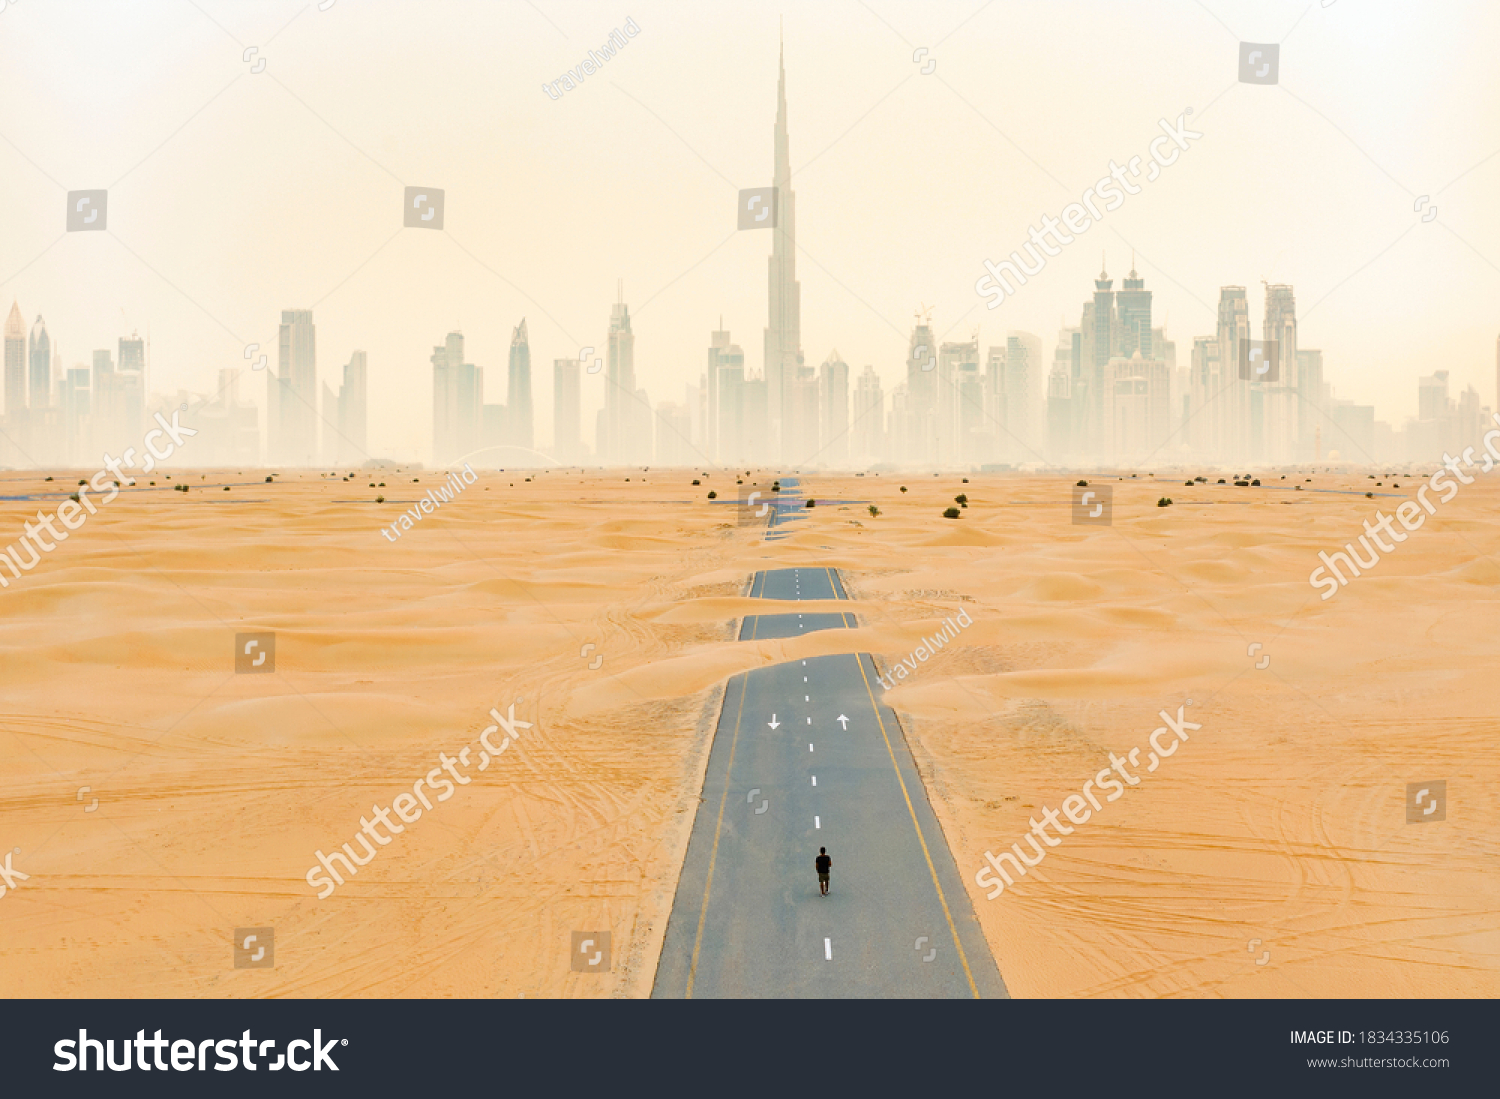 View from above, stunning aerial view of an unidentified person walking on a deserted road covered by sand dunes with the Dubai Skyline in the background. Dubai, United Arab Emirates. #1834335106